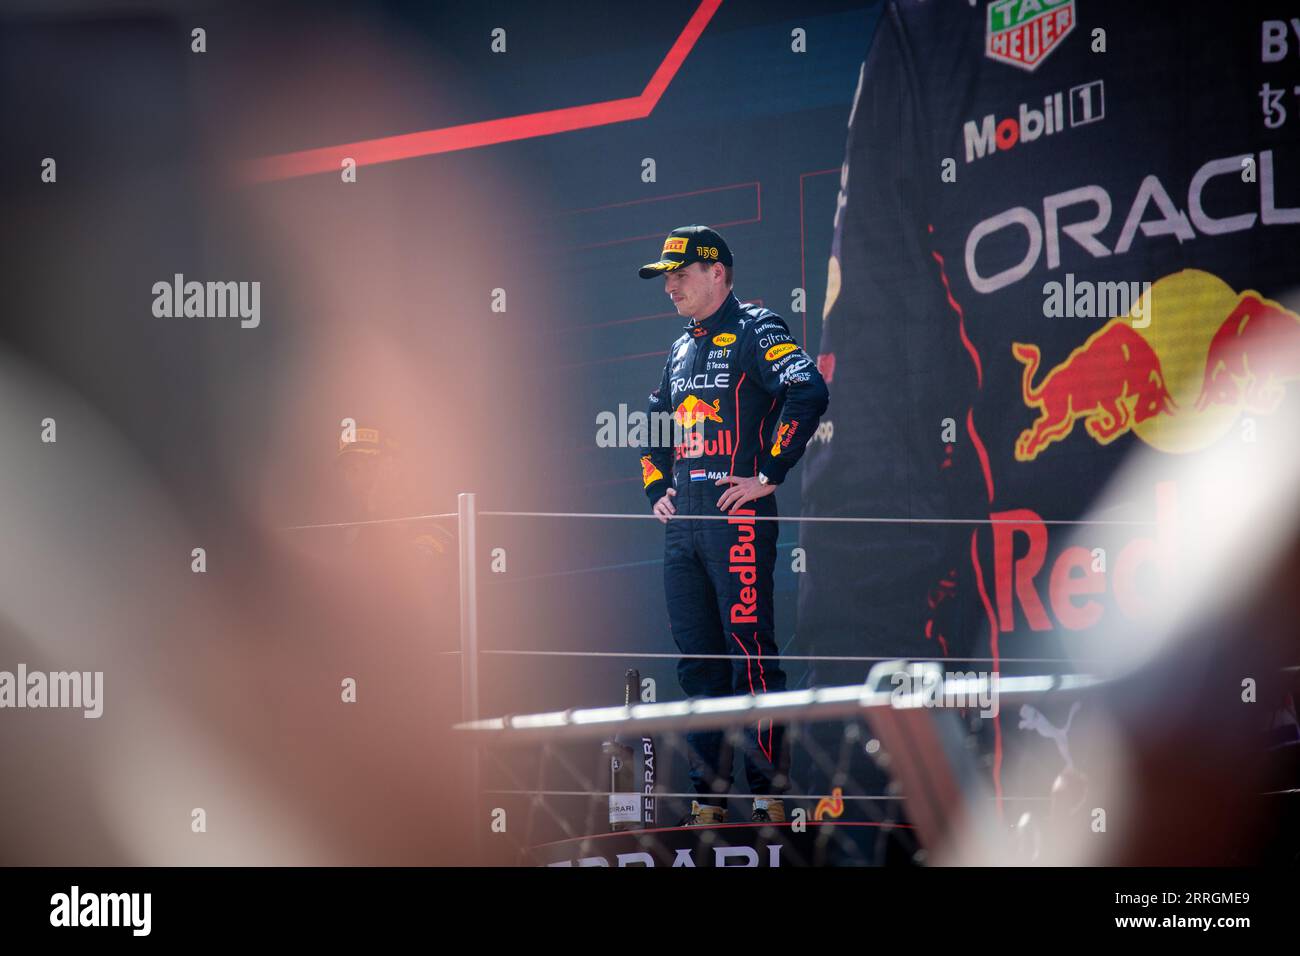 Max Verstappen on the podium, reveling in his first-place finish at the Spanish Grand Prix. Stock Photo